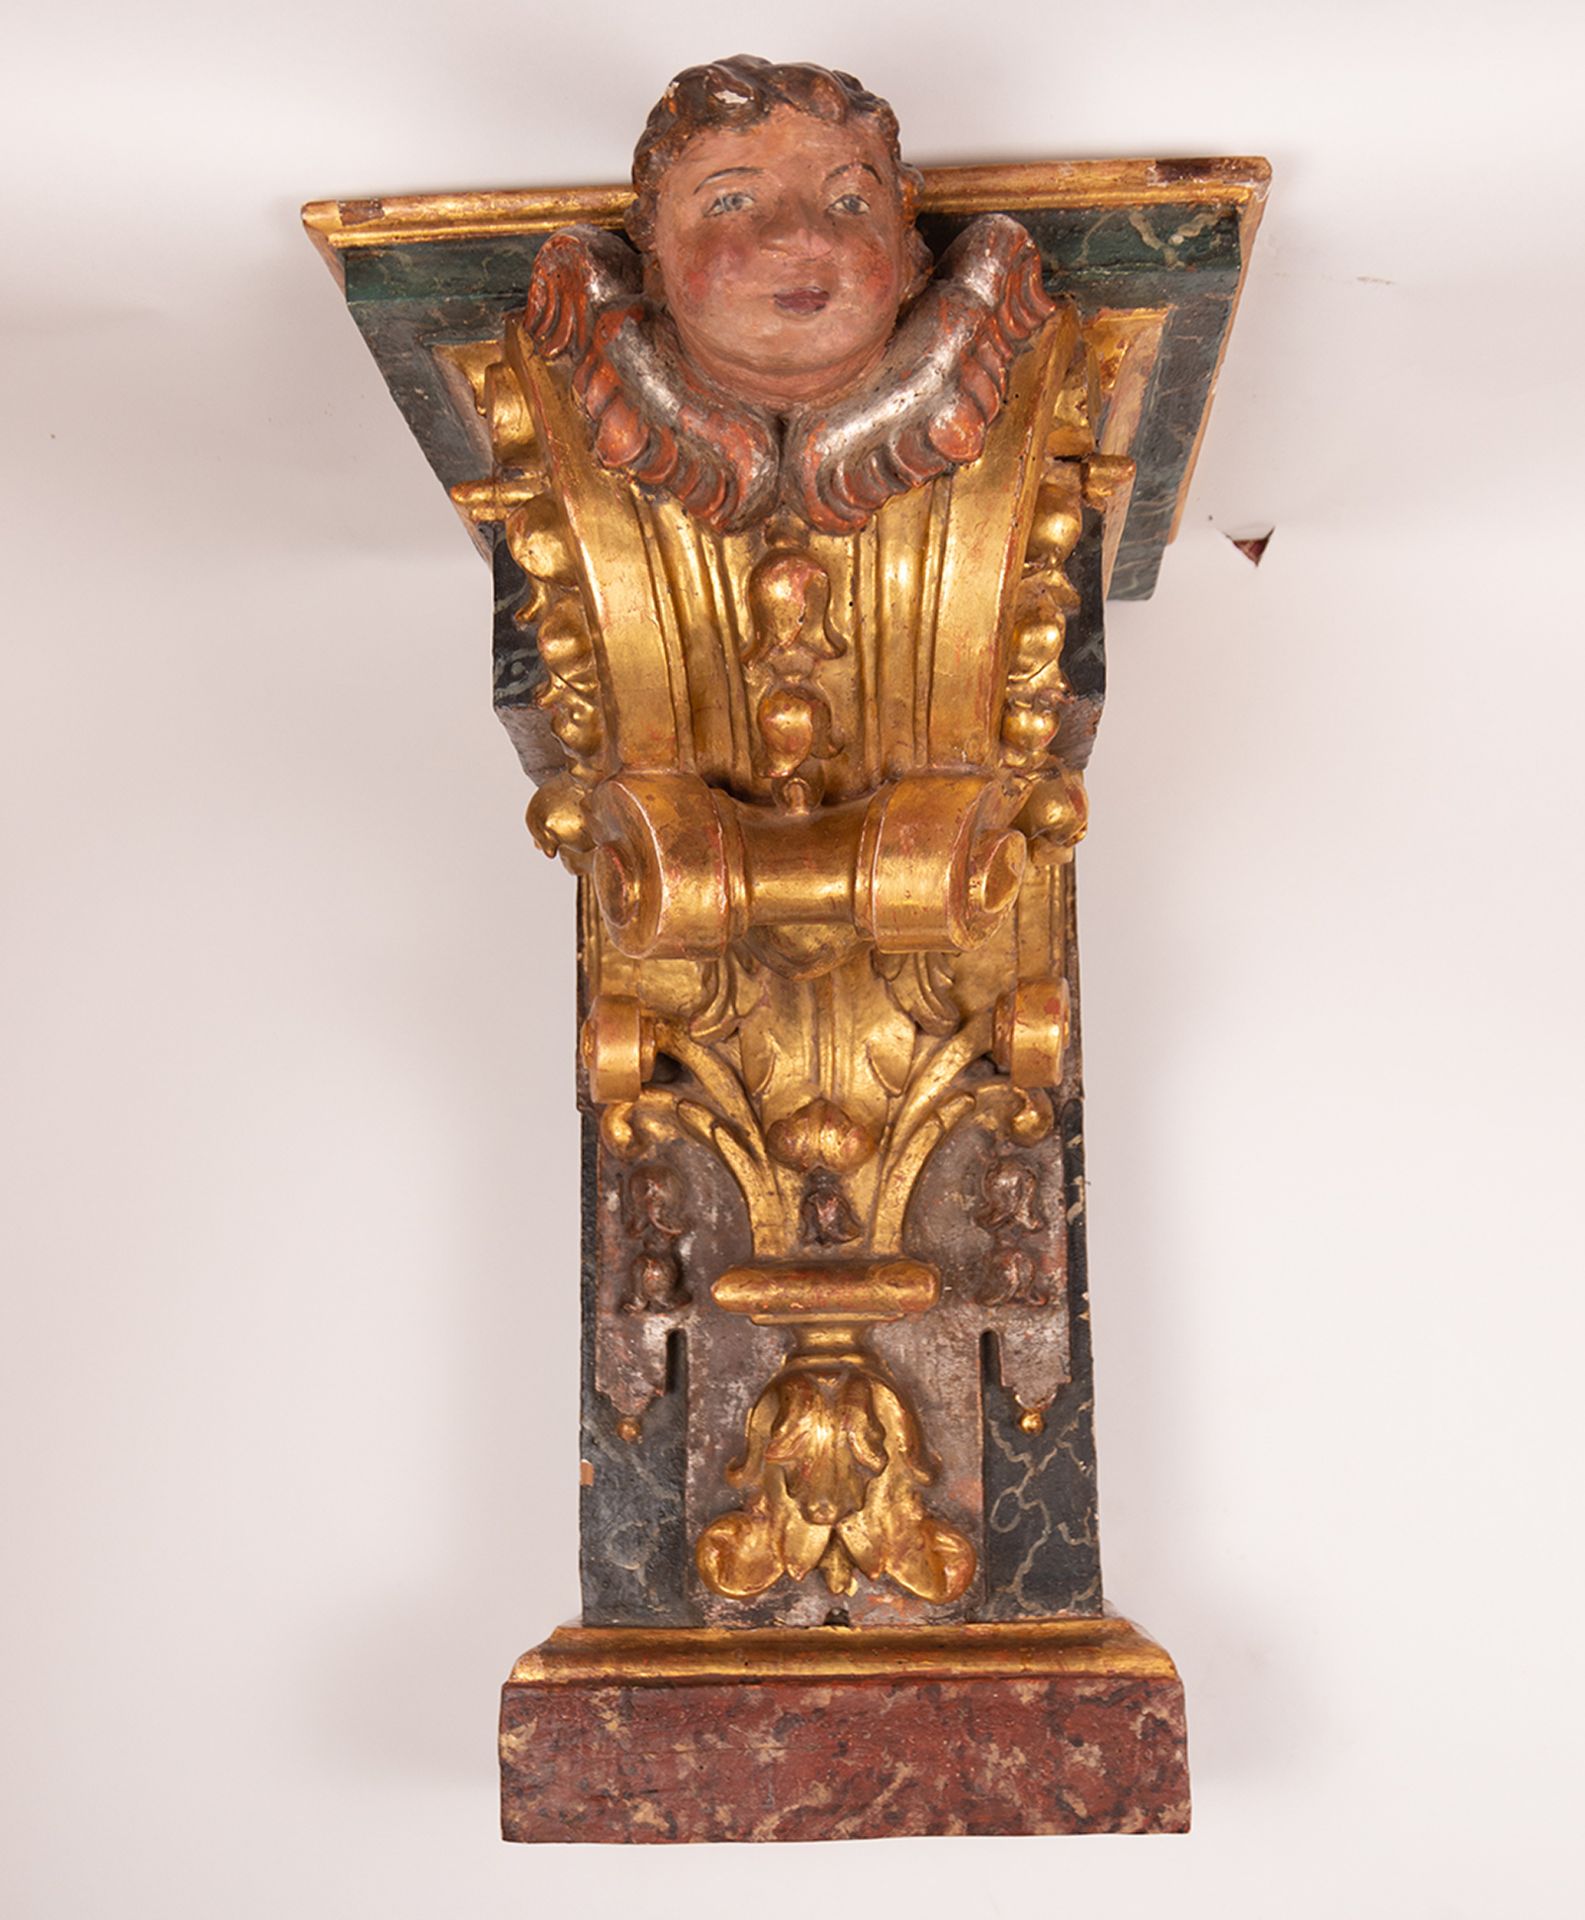 Large pair of Baroque wall corbels with Cherub finishings, Spain, 17th - 18th centuries - Bild 3 aus 9